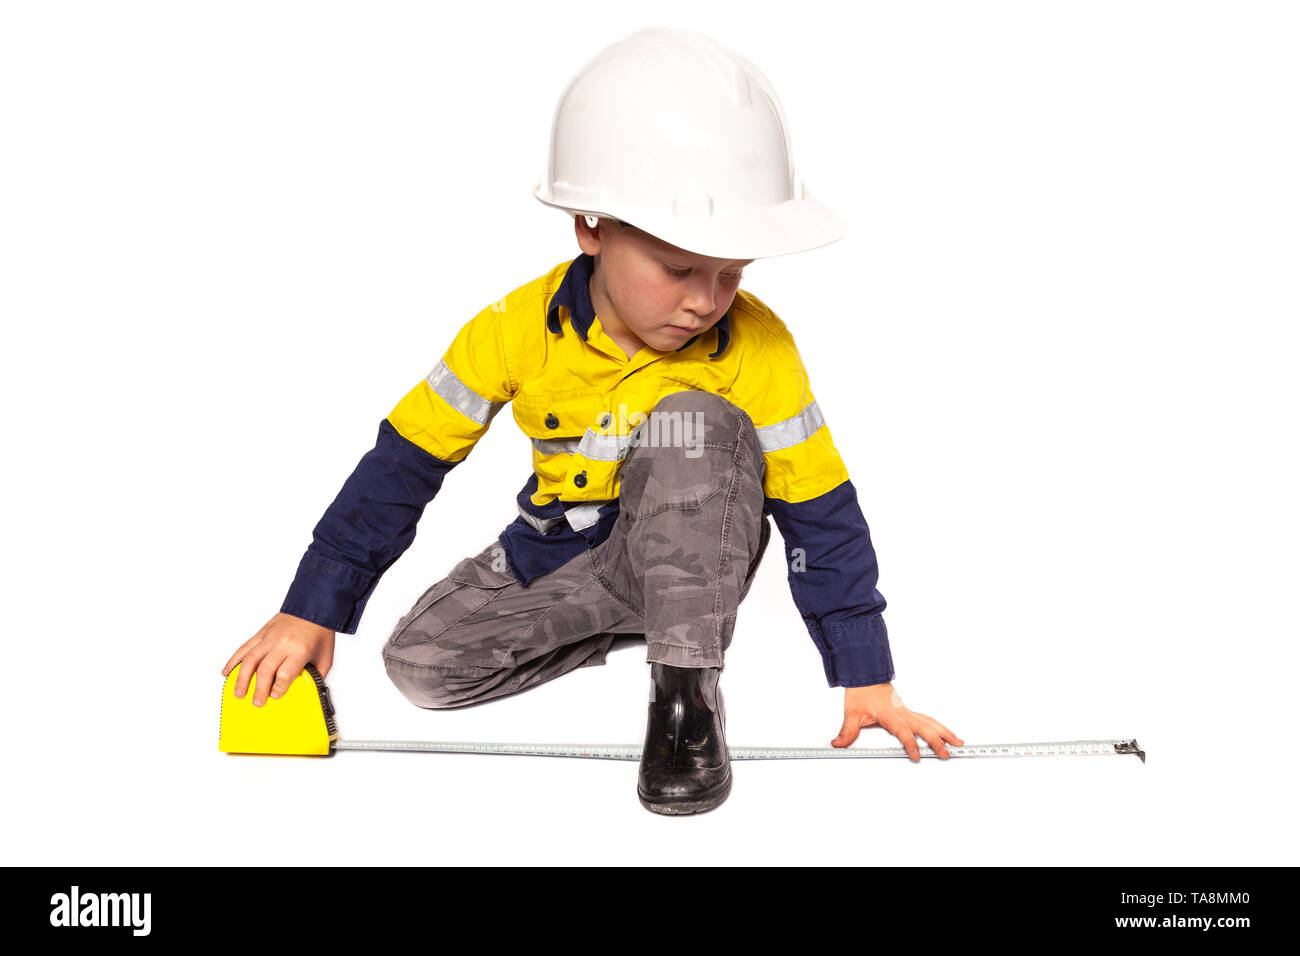 Young blond caucasian boy measuring something role playing as a construction worker in a yellow and blue hi-viz shirt, boots, white hard hat, and tape Stock Photo